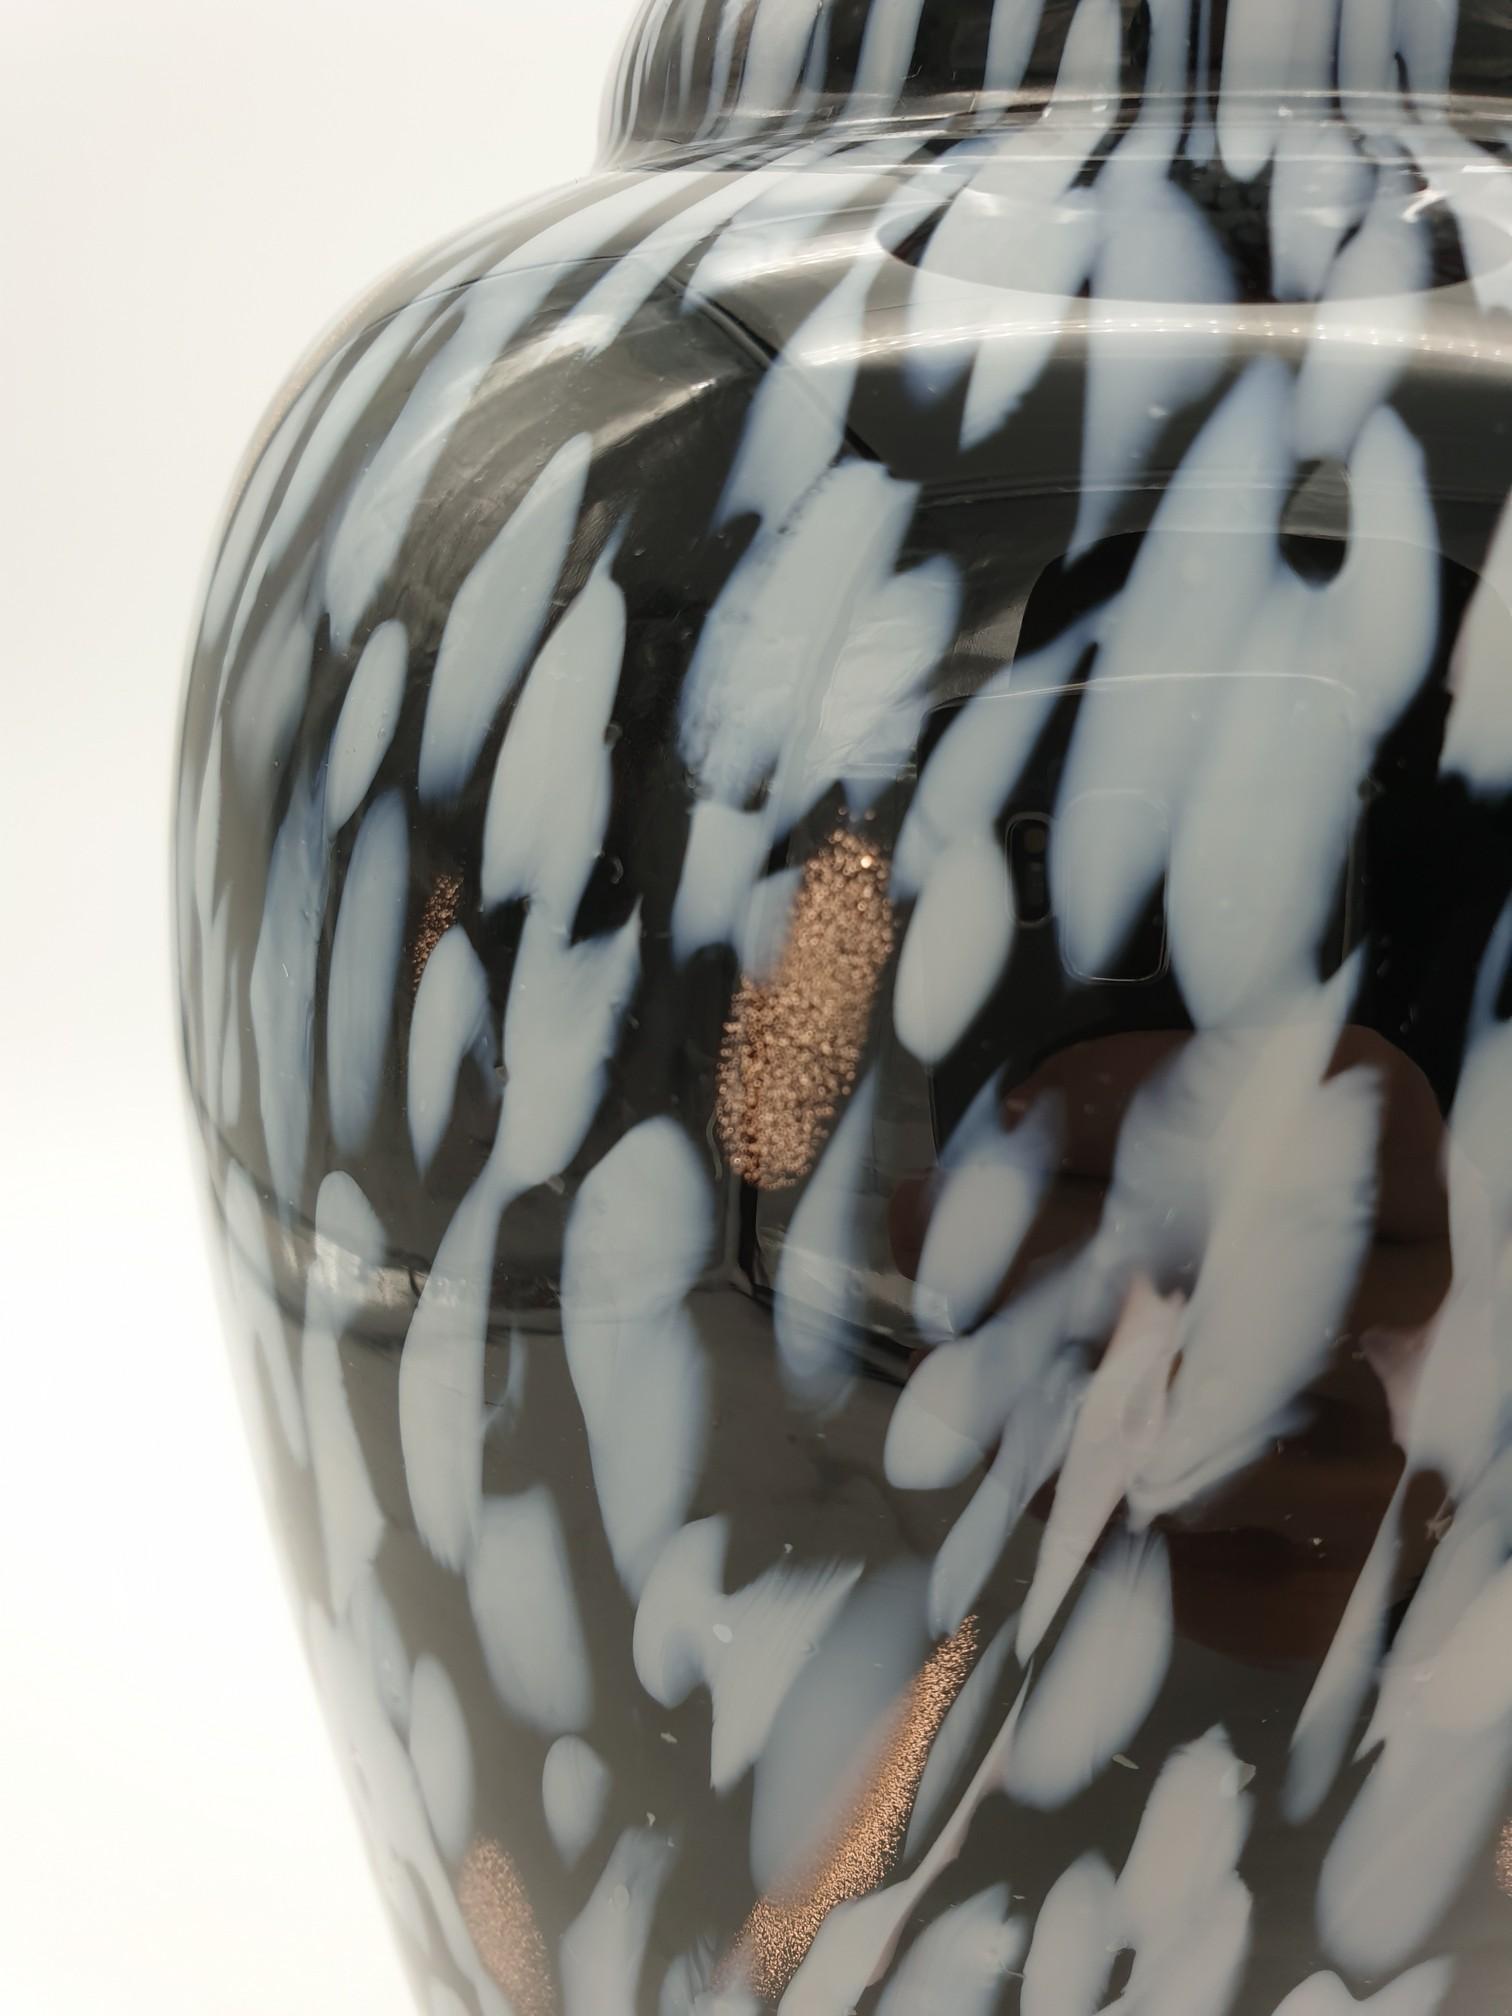 Vintage Murano Glass Vase in Black Color with White Spots by Cenedese, 1970s For Sale 1